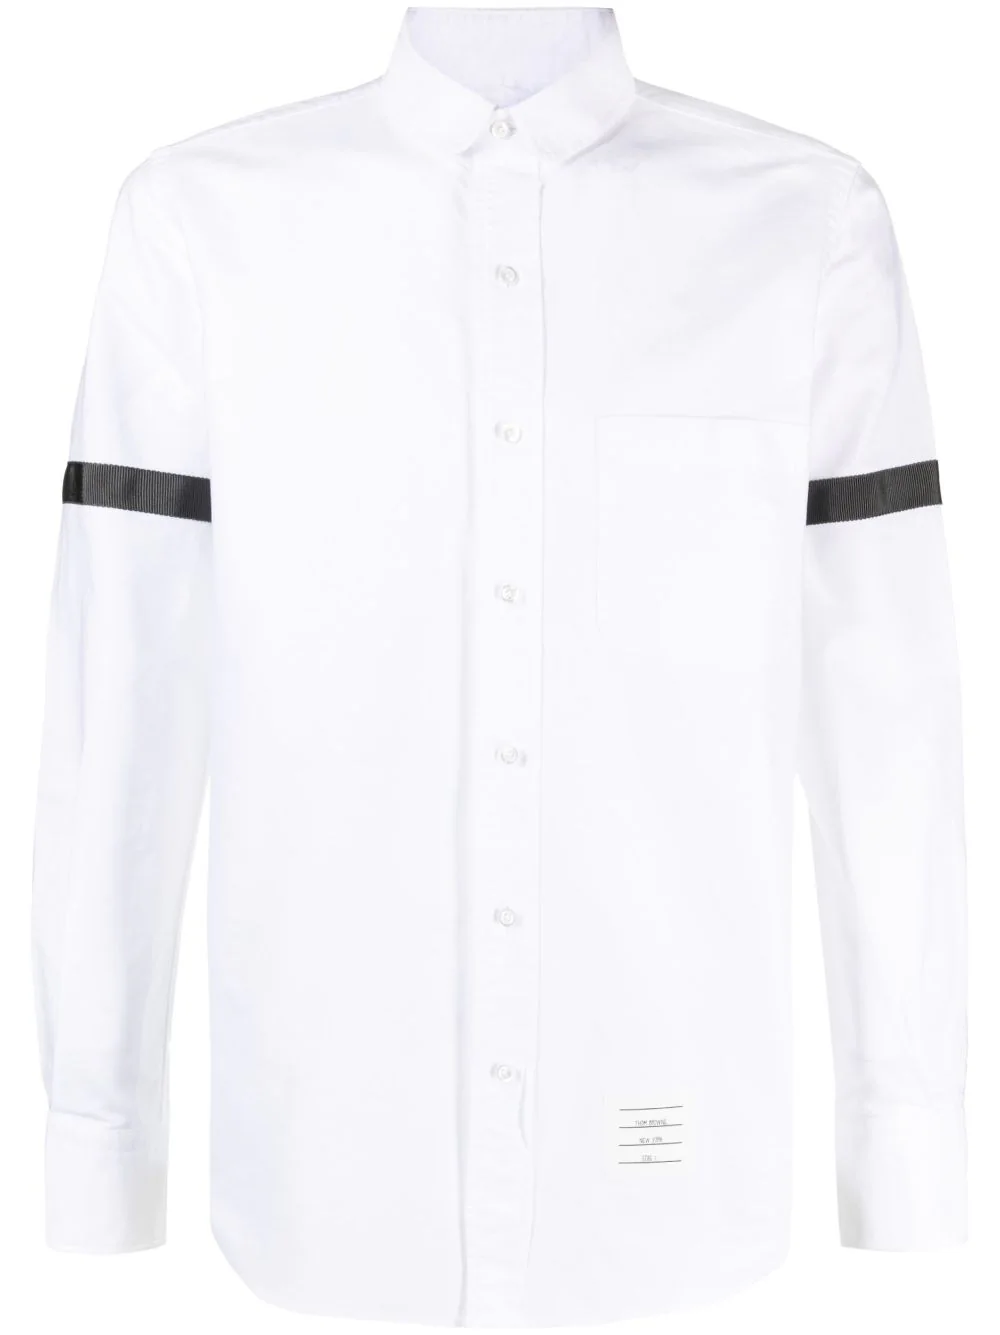 Straight Fit Mini Round Collar Long Sleeve Shirt W/ Gg Armband In Oxford White